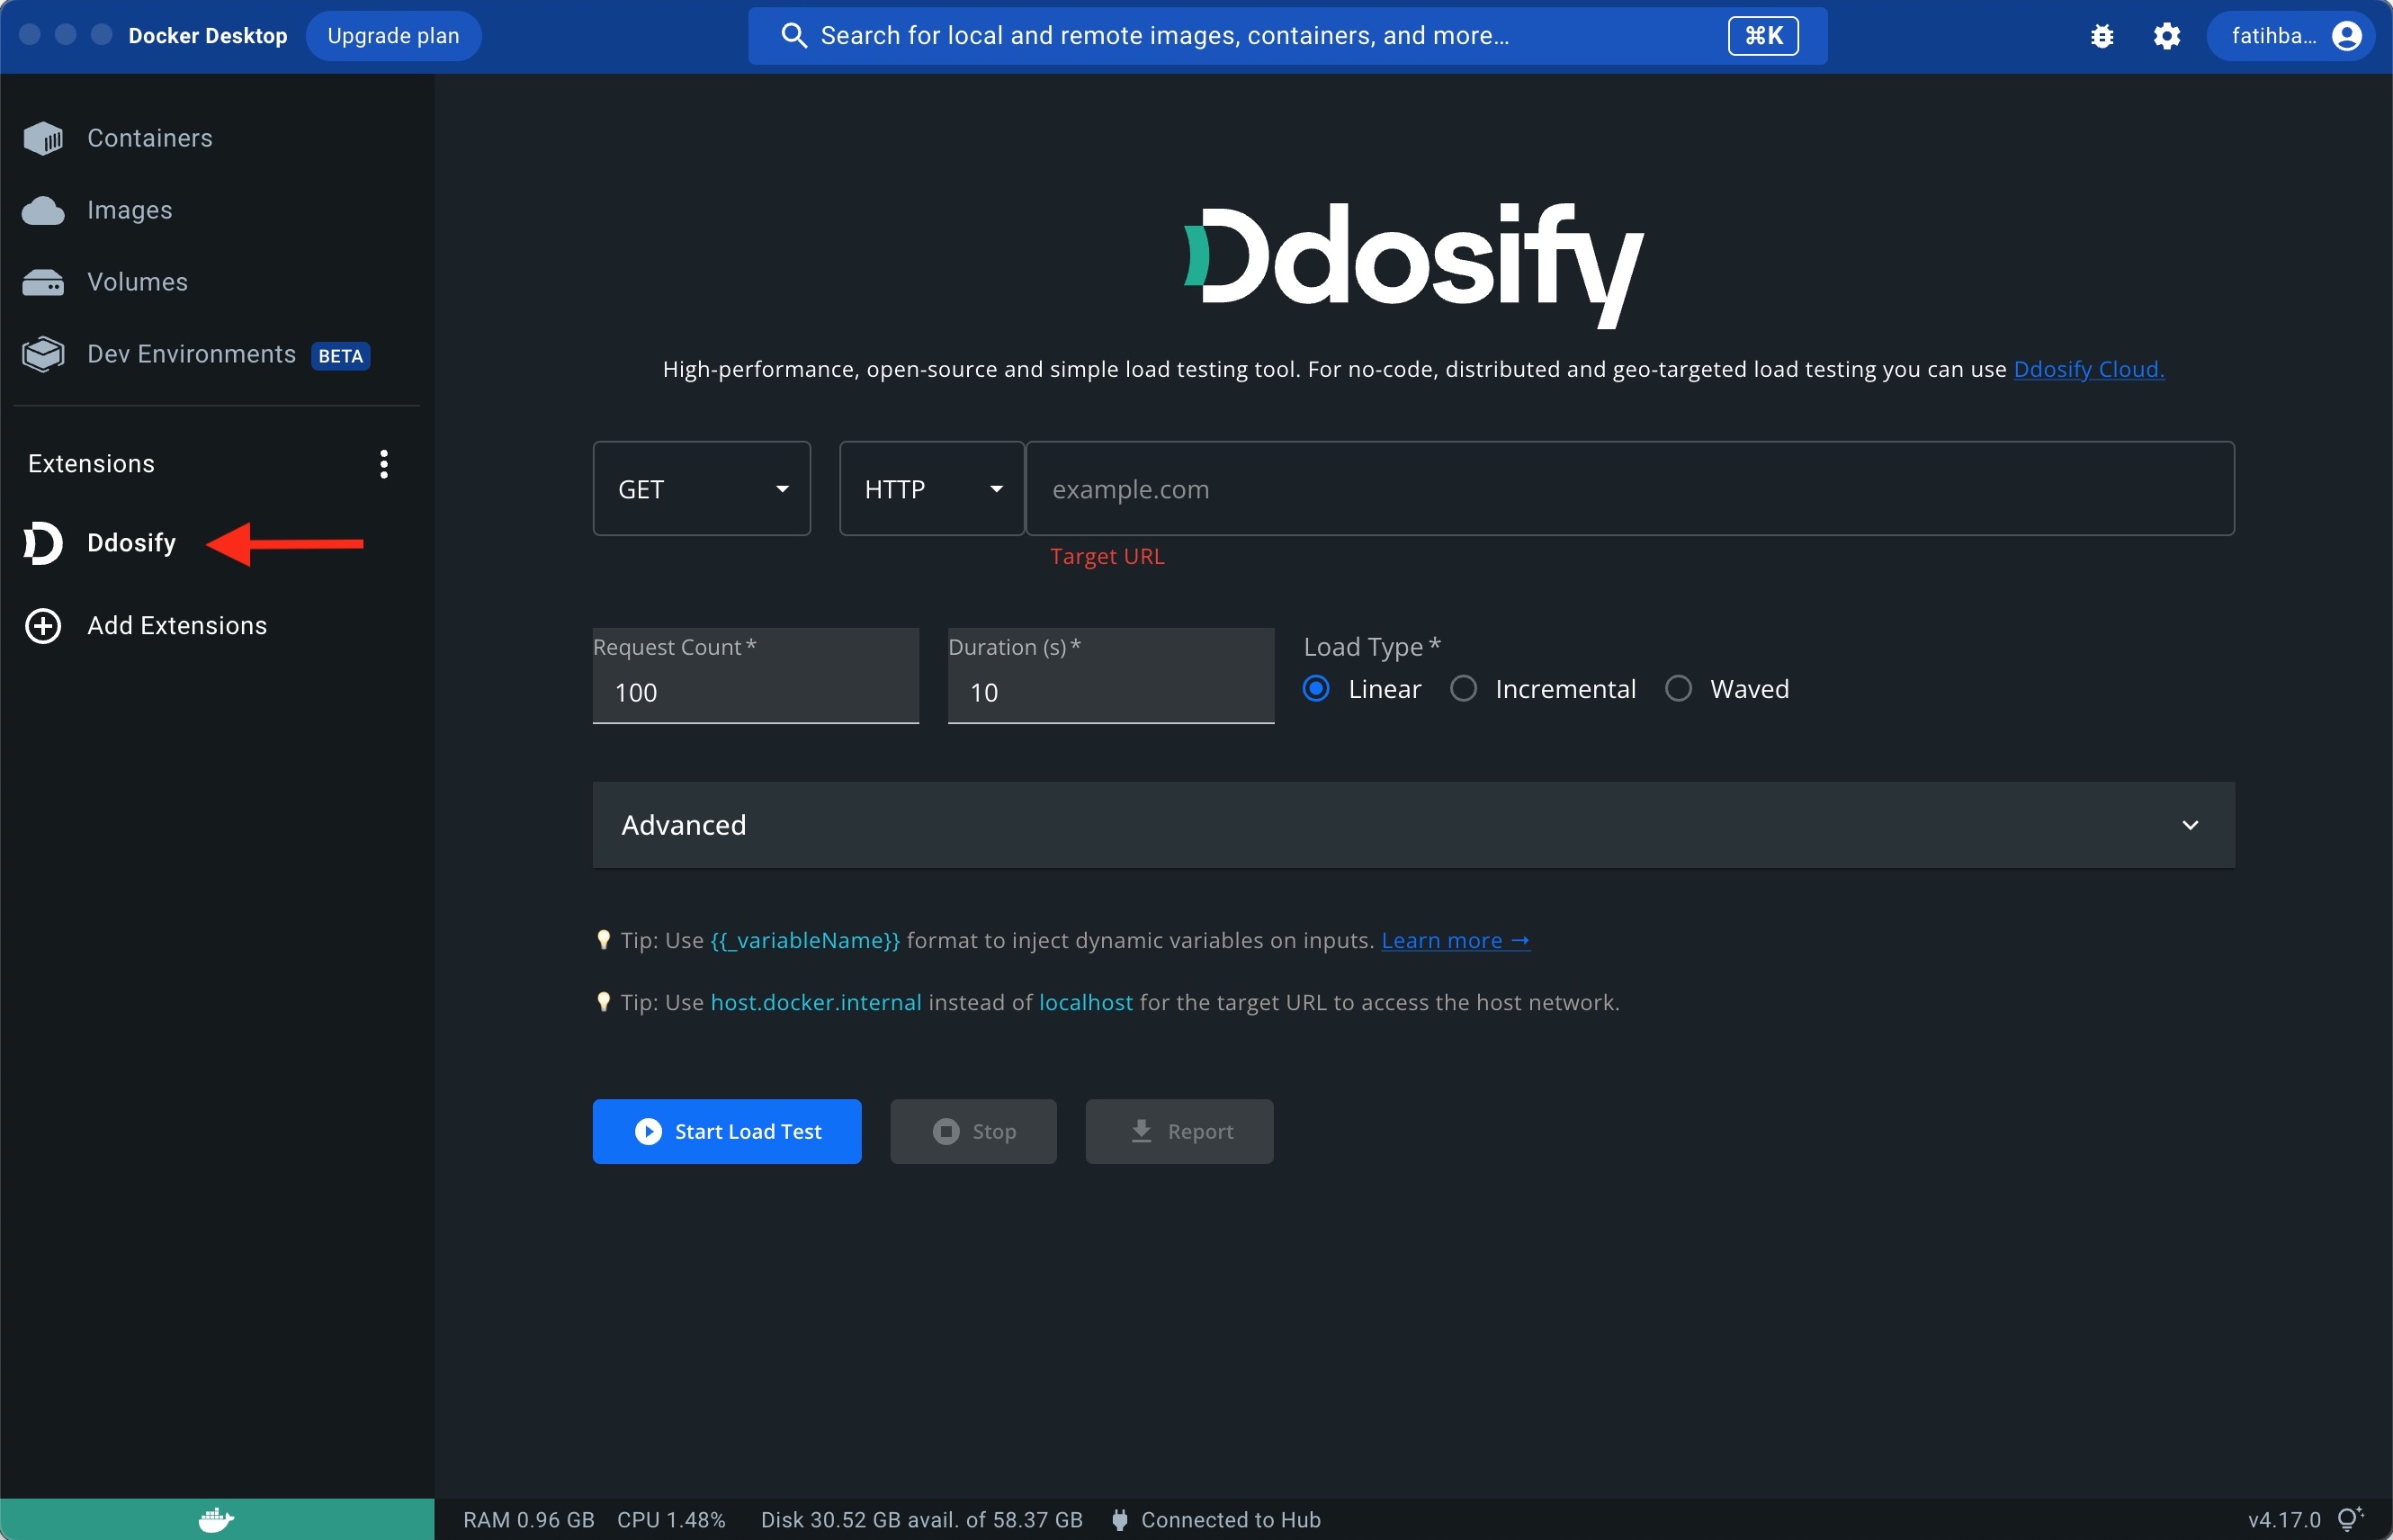 Ddosify Docker Extension - High-performance, simple-to-use load testing tool quick start